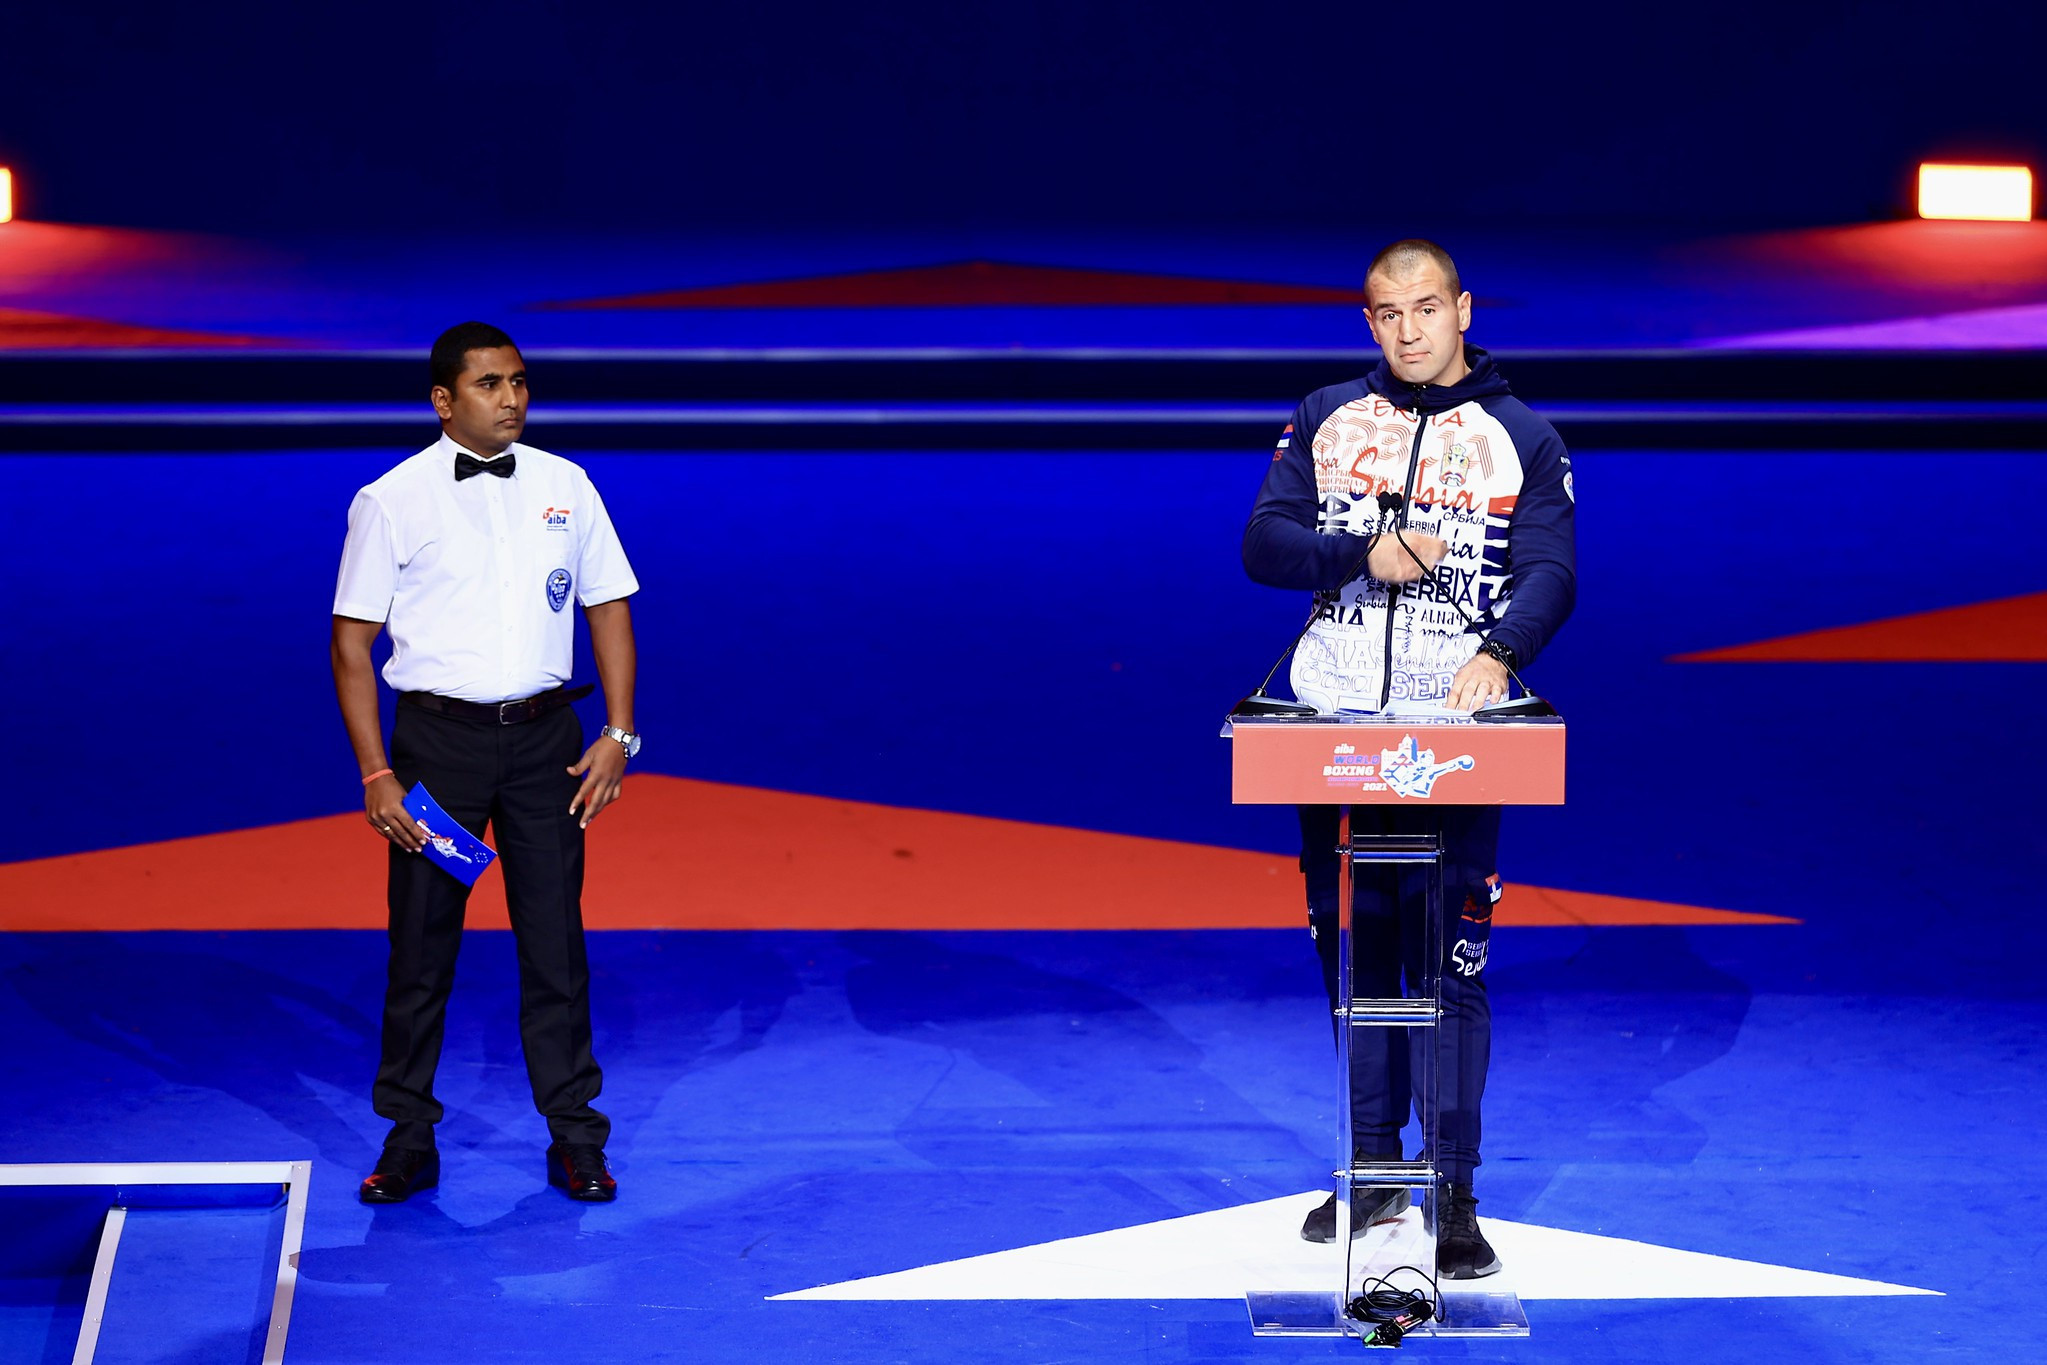 Vladan Babic took the Athletes Oath for the Men's World Boxing Championships ©AIBA